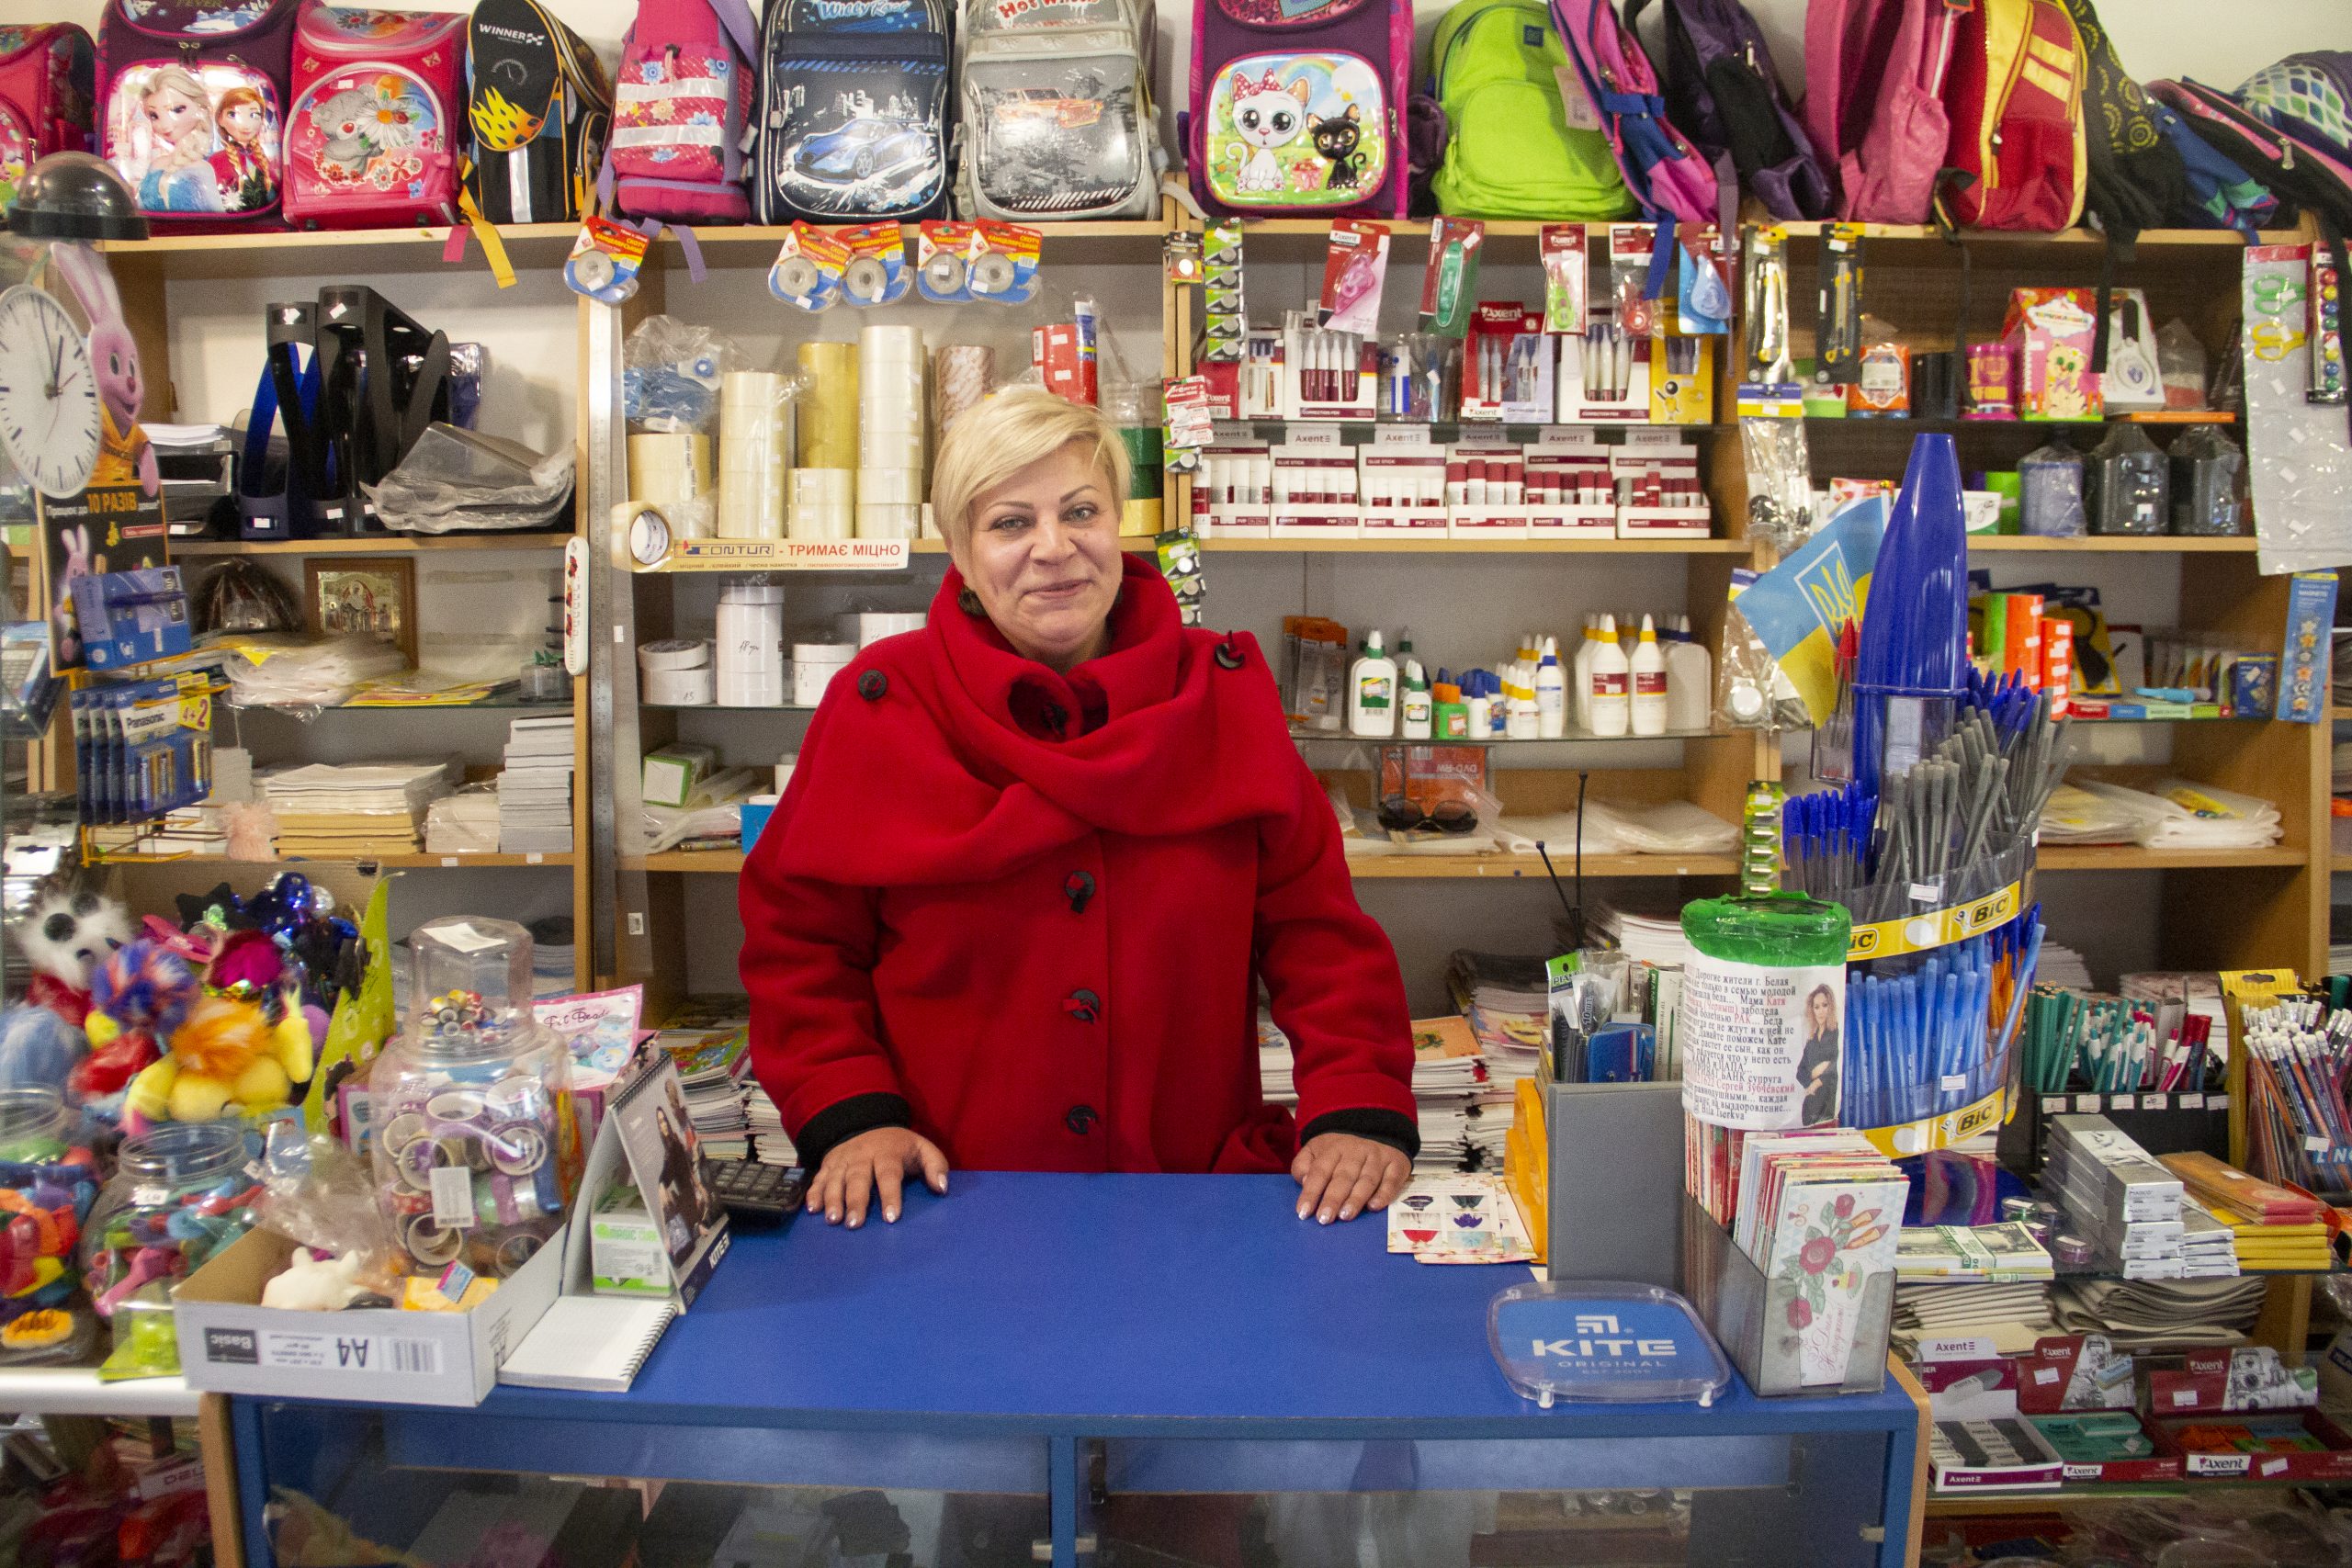 A woman smiles behind the counter of her shop.